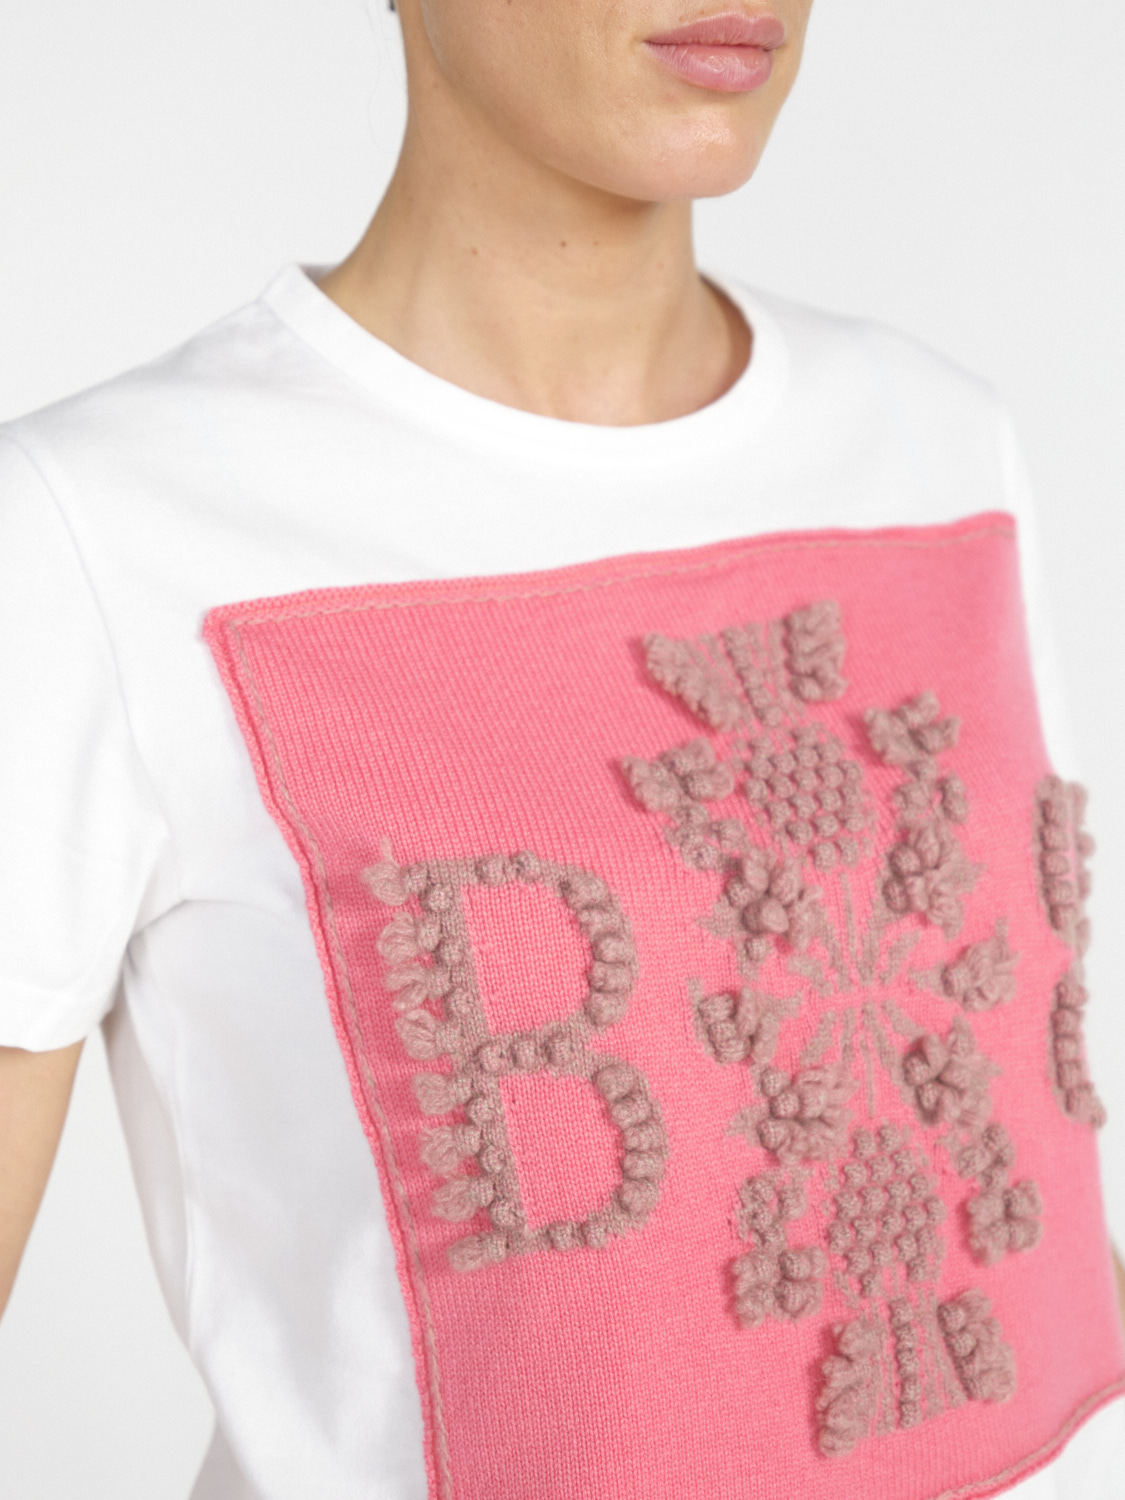 Barrie Thistle Logo Top - T-shirt with cashmere application  coral XS